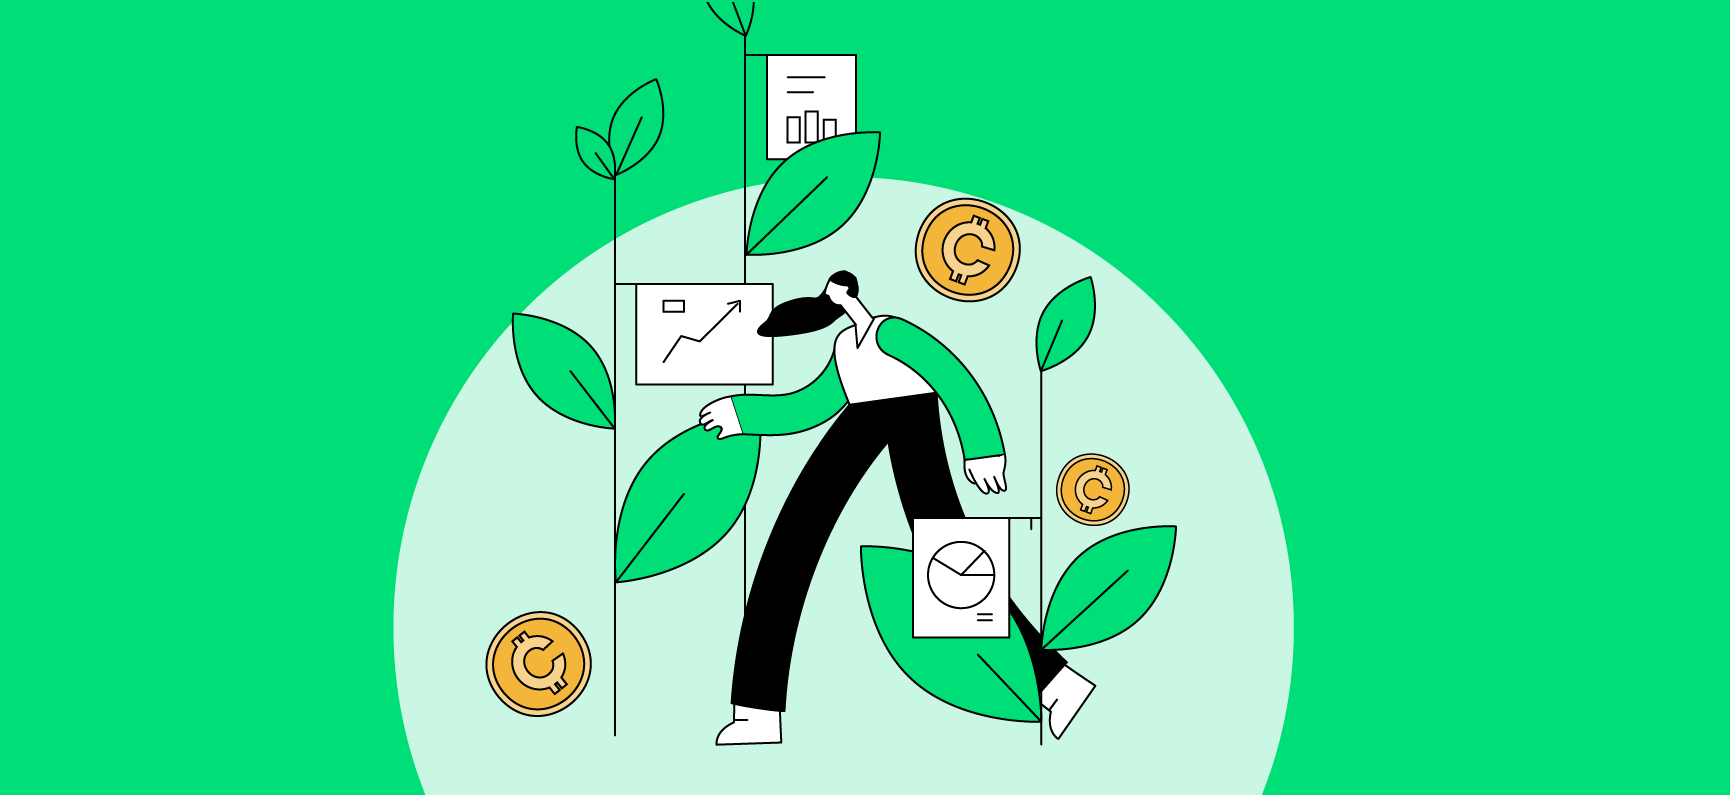 Cointree